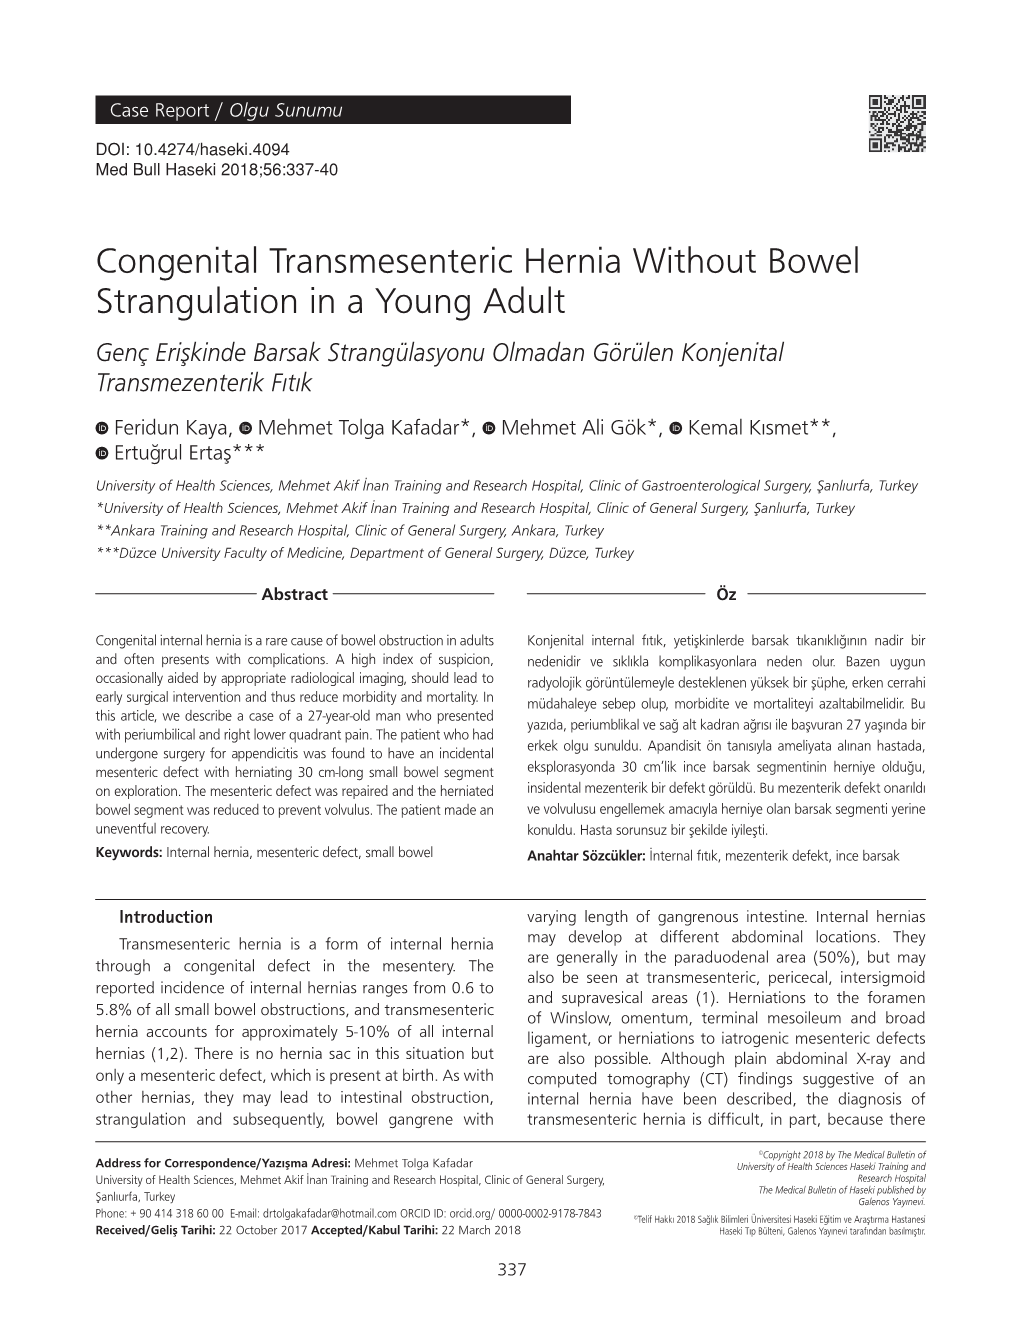 Congenital Transmesenteric Hernia Without Bowel Strangulation in a Young Adult